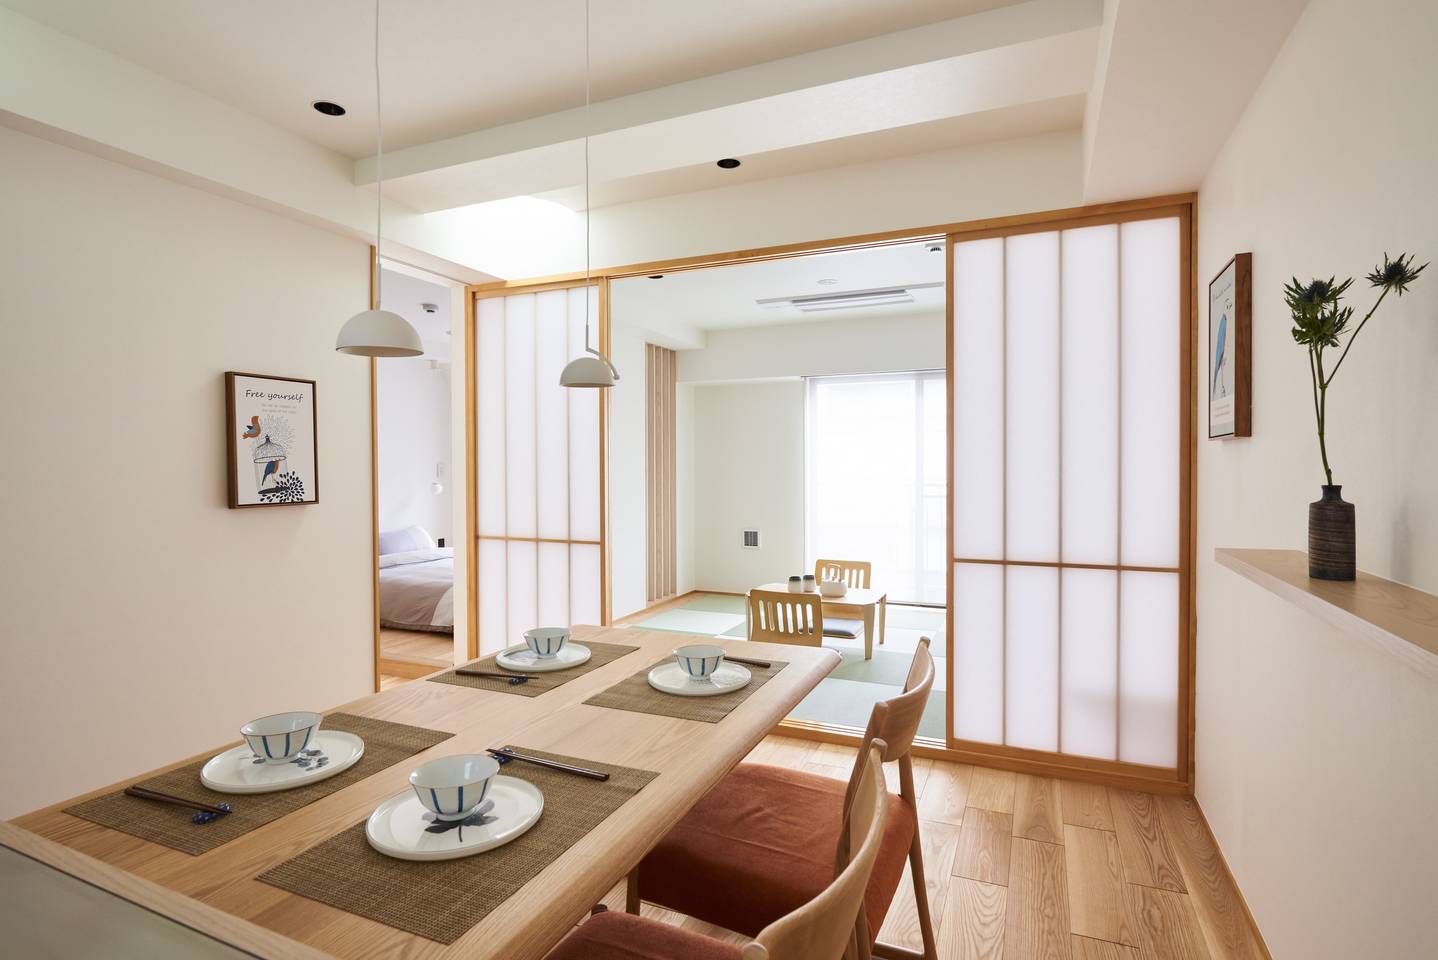 <p>Between the scores of sky-scraping luxury retreats and intimate <a href="https://www.cntraveler.com/gallery/boutique-hotels-tokyo?mbid=synd_msn_rss&utm_source=msn&utm_medium=syndication">boutiques</a>, <a href="https://www.cntraveler.com/destinations/tokyo?mbid=synd_msn_rss&utm_source=msn&utm_medium=syndication">Tokyo</a> has no shortage of <a href="https://www.cntraveler.com/gallery/best-hotels-in-tokyo?mbid=synd_msn_rss&utm_source=msn&utm_medium=syndication">hotel options</a> for travelers to choose from—but when location is the priority, Airbnb is often the way to go. Staying in a rental is perfect for those who want to be immersed in the colorful streets of neighborhoods like Ginza, <a href="https://www.cntraveler.com/story/the-essential-guide-to-shinjuku-tokyos-busiest-neighborhood?mbid=synd_msn_rss&utm_source=msn&utm_medium=syndication">Shinjuku</a>, and Nakano. Admittedly, some of these apartments—like most in the Japanese capital—are on the small side, but come filled with personality, and helpful amenities like early luggage drop-off, washer/dryers, and even a grand piano in one Shinjuku abode.</p> <p>From sakura-themed living rooms to tatami-lined traditional homes, here are 14 spots that are well worth a stay on your next trip to Tokyo.</p> <p><em>We've selected these listings based on Superhost status, ratings, amenities, location, decor, editor stays, and previous guest reviews. All listings featured on</em> Condé Nast Traveler <em>are independently selected by our editors. If you book something through our links, we may earn an affiliate commission.</em></p><p>Sign up to receive the latest news, expert tips, and inspiration on all things travel</p><a href="https://www.cntraveler.com/newsletter/the-daily?sourceCode=msnsend">Inspire Me</a>